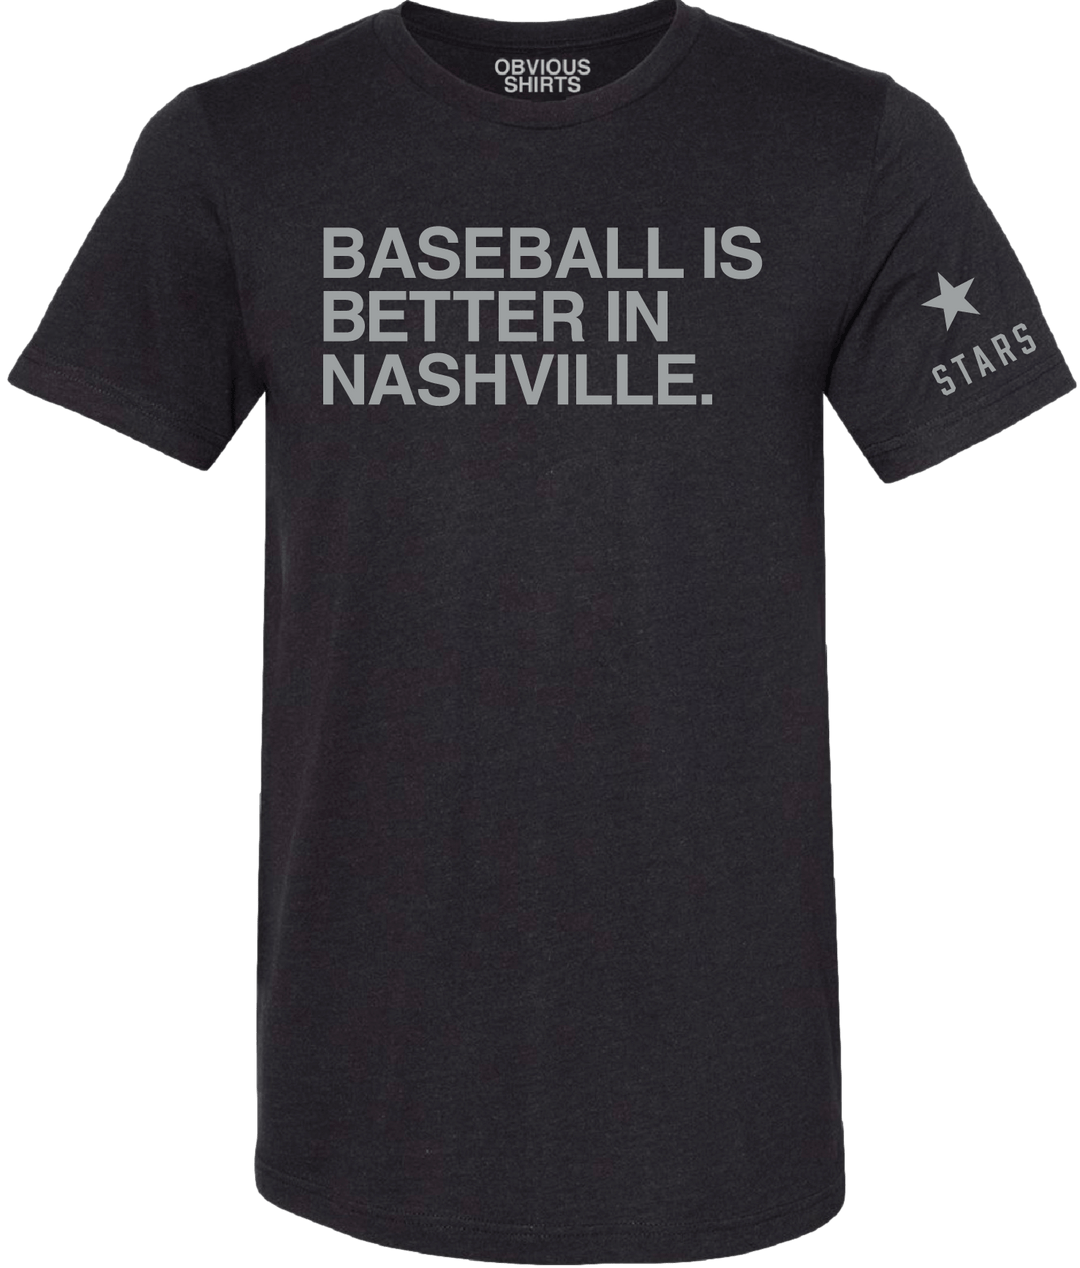 BASEBALL IS BETTER IN NASHVILLE. (BLACK) - OBVIOUS SHIRTS